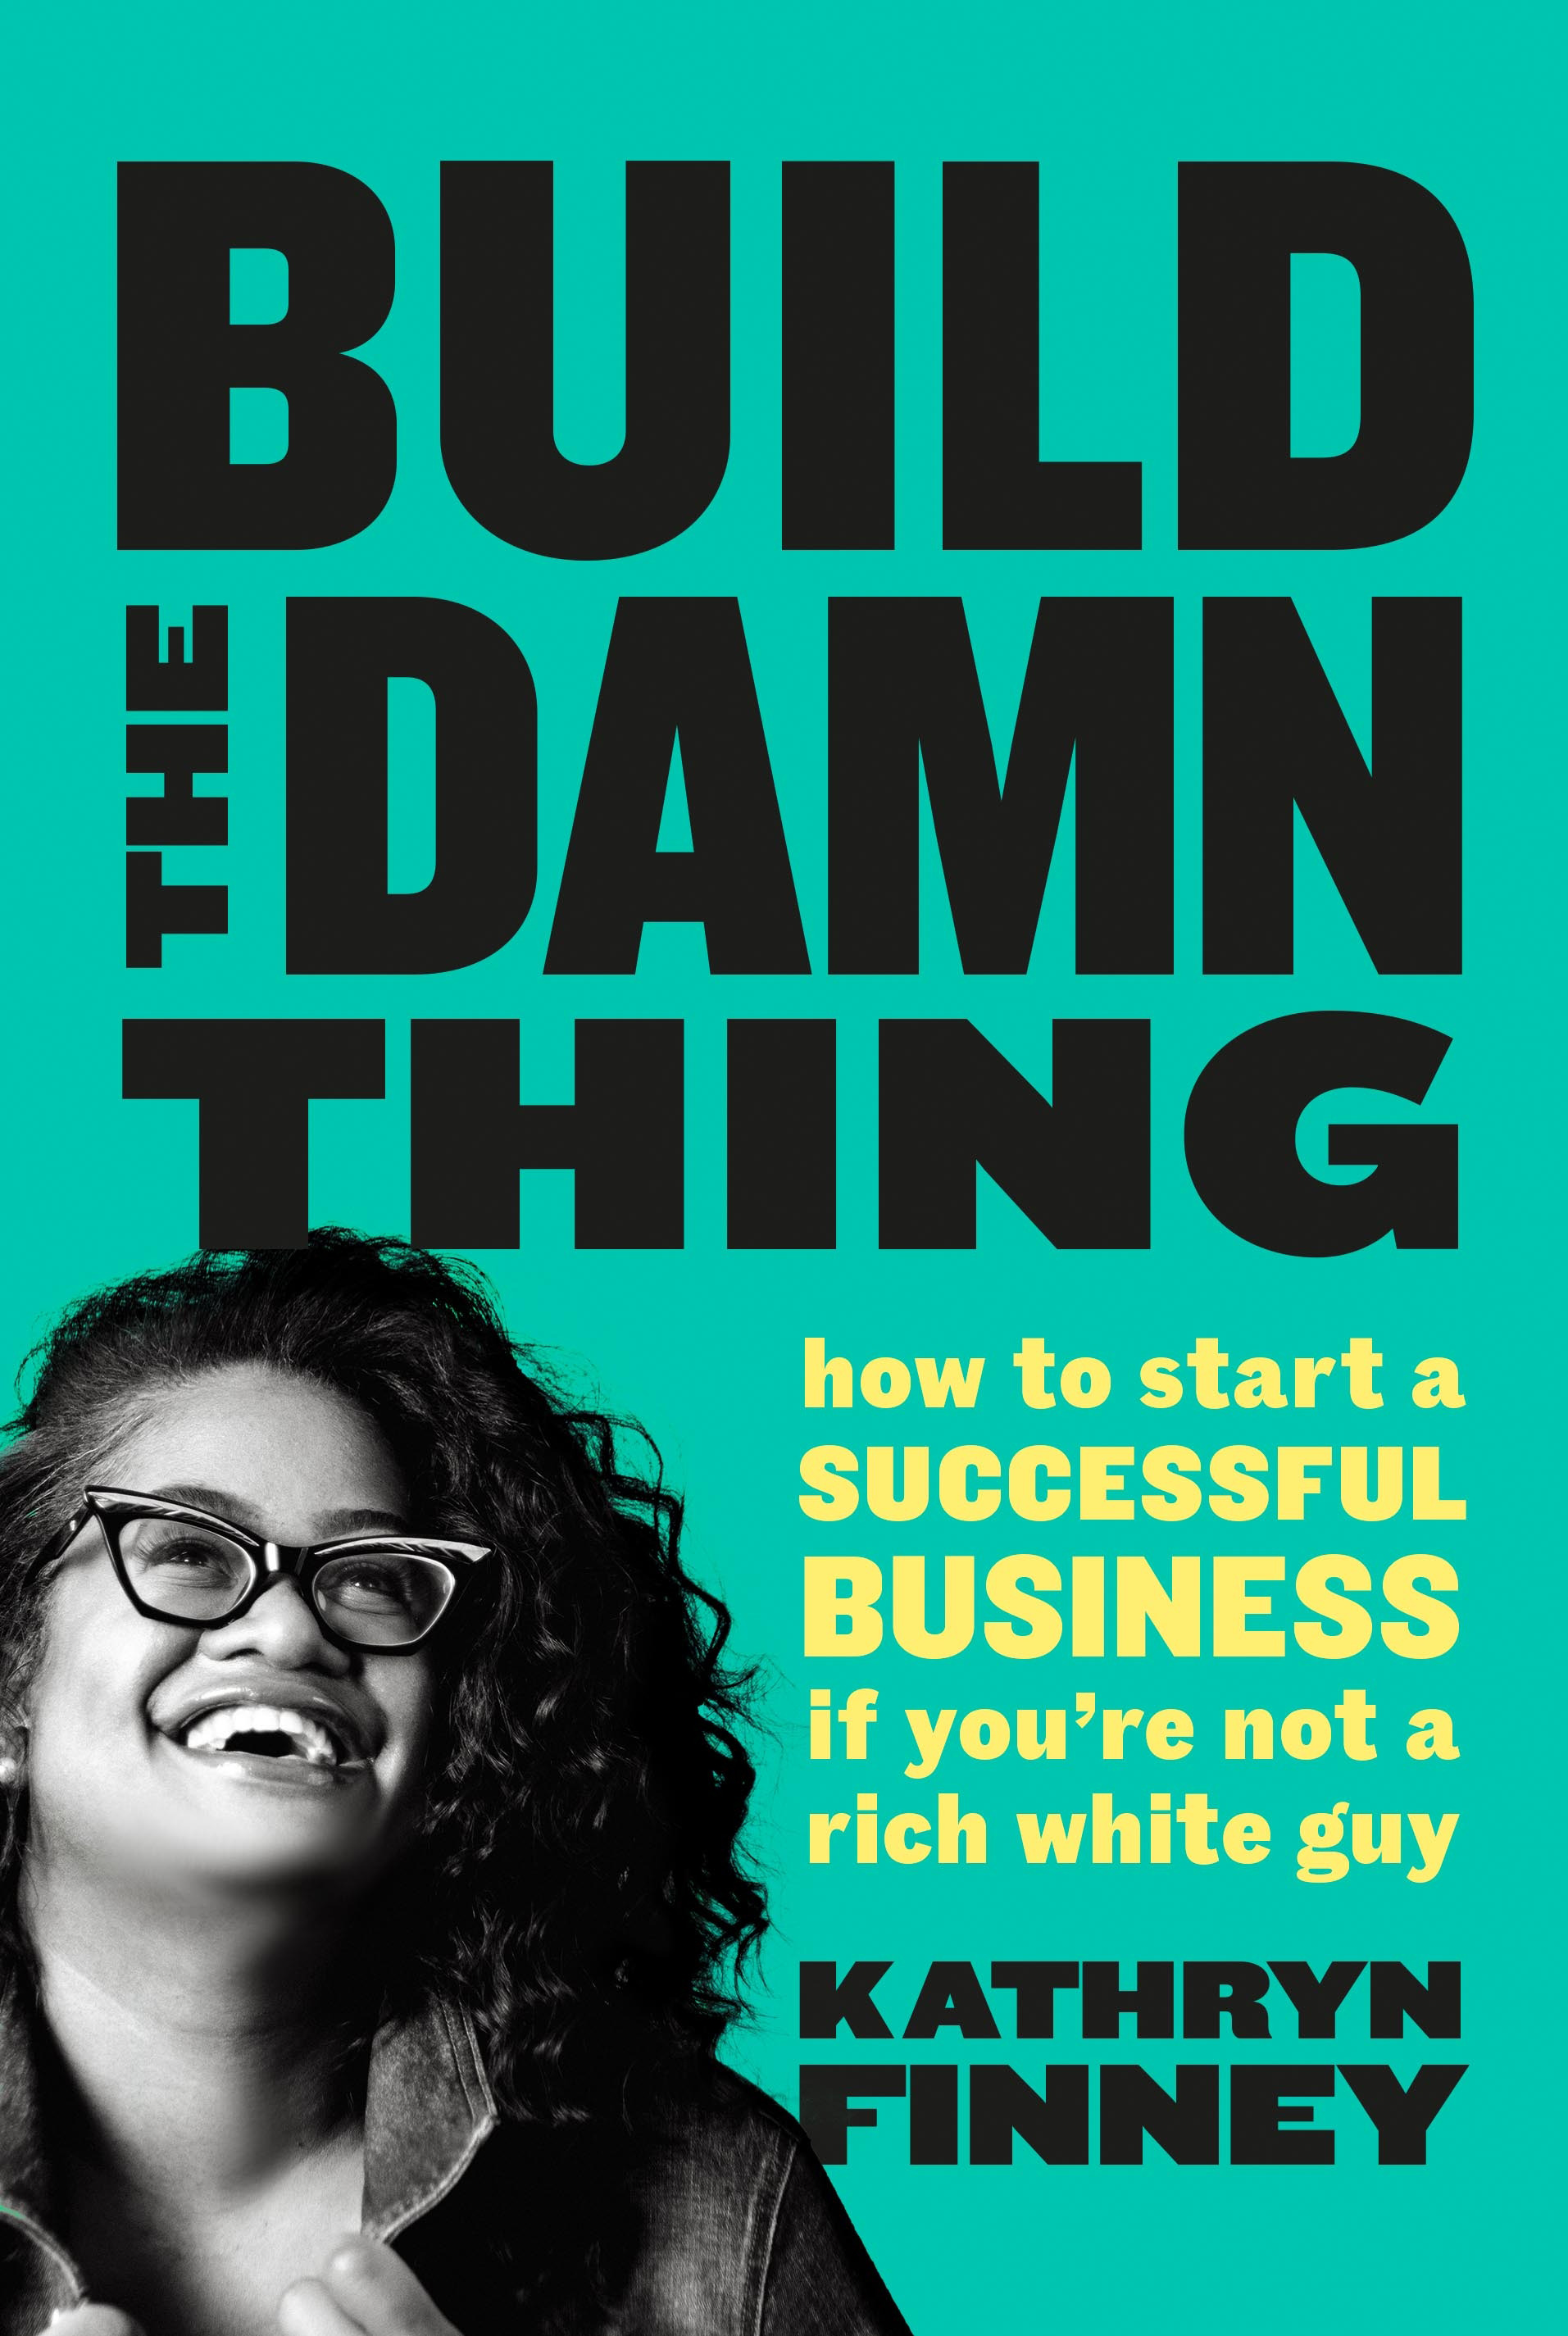 Build The Damn Thing : How to Start a Successful Business if You're Not a Rich White Guy | Business & Management